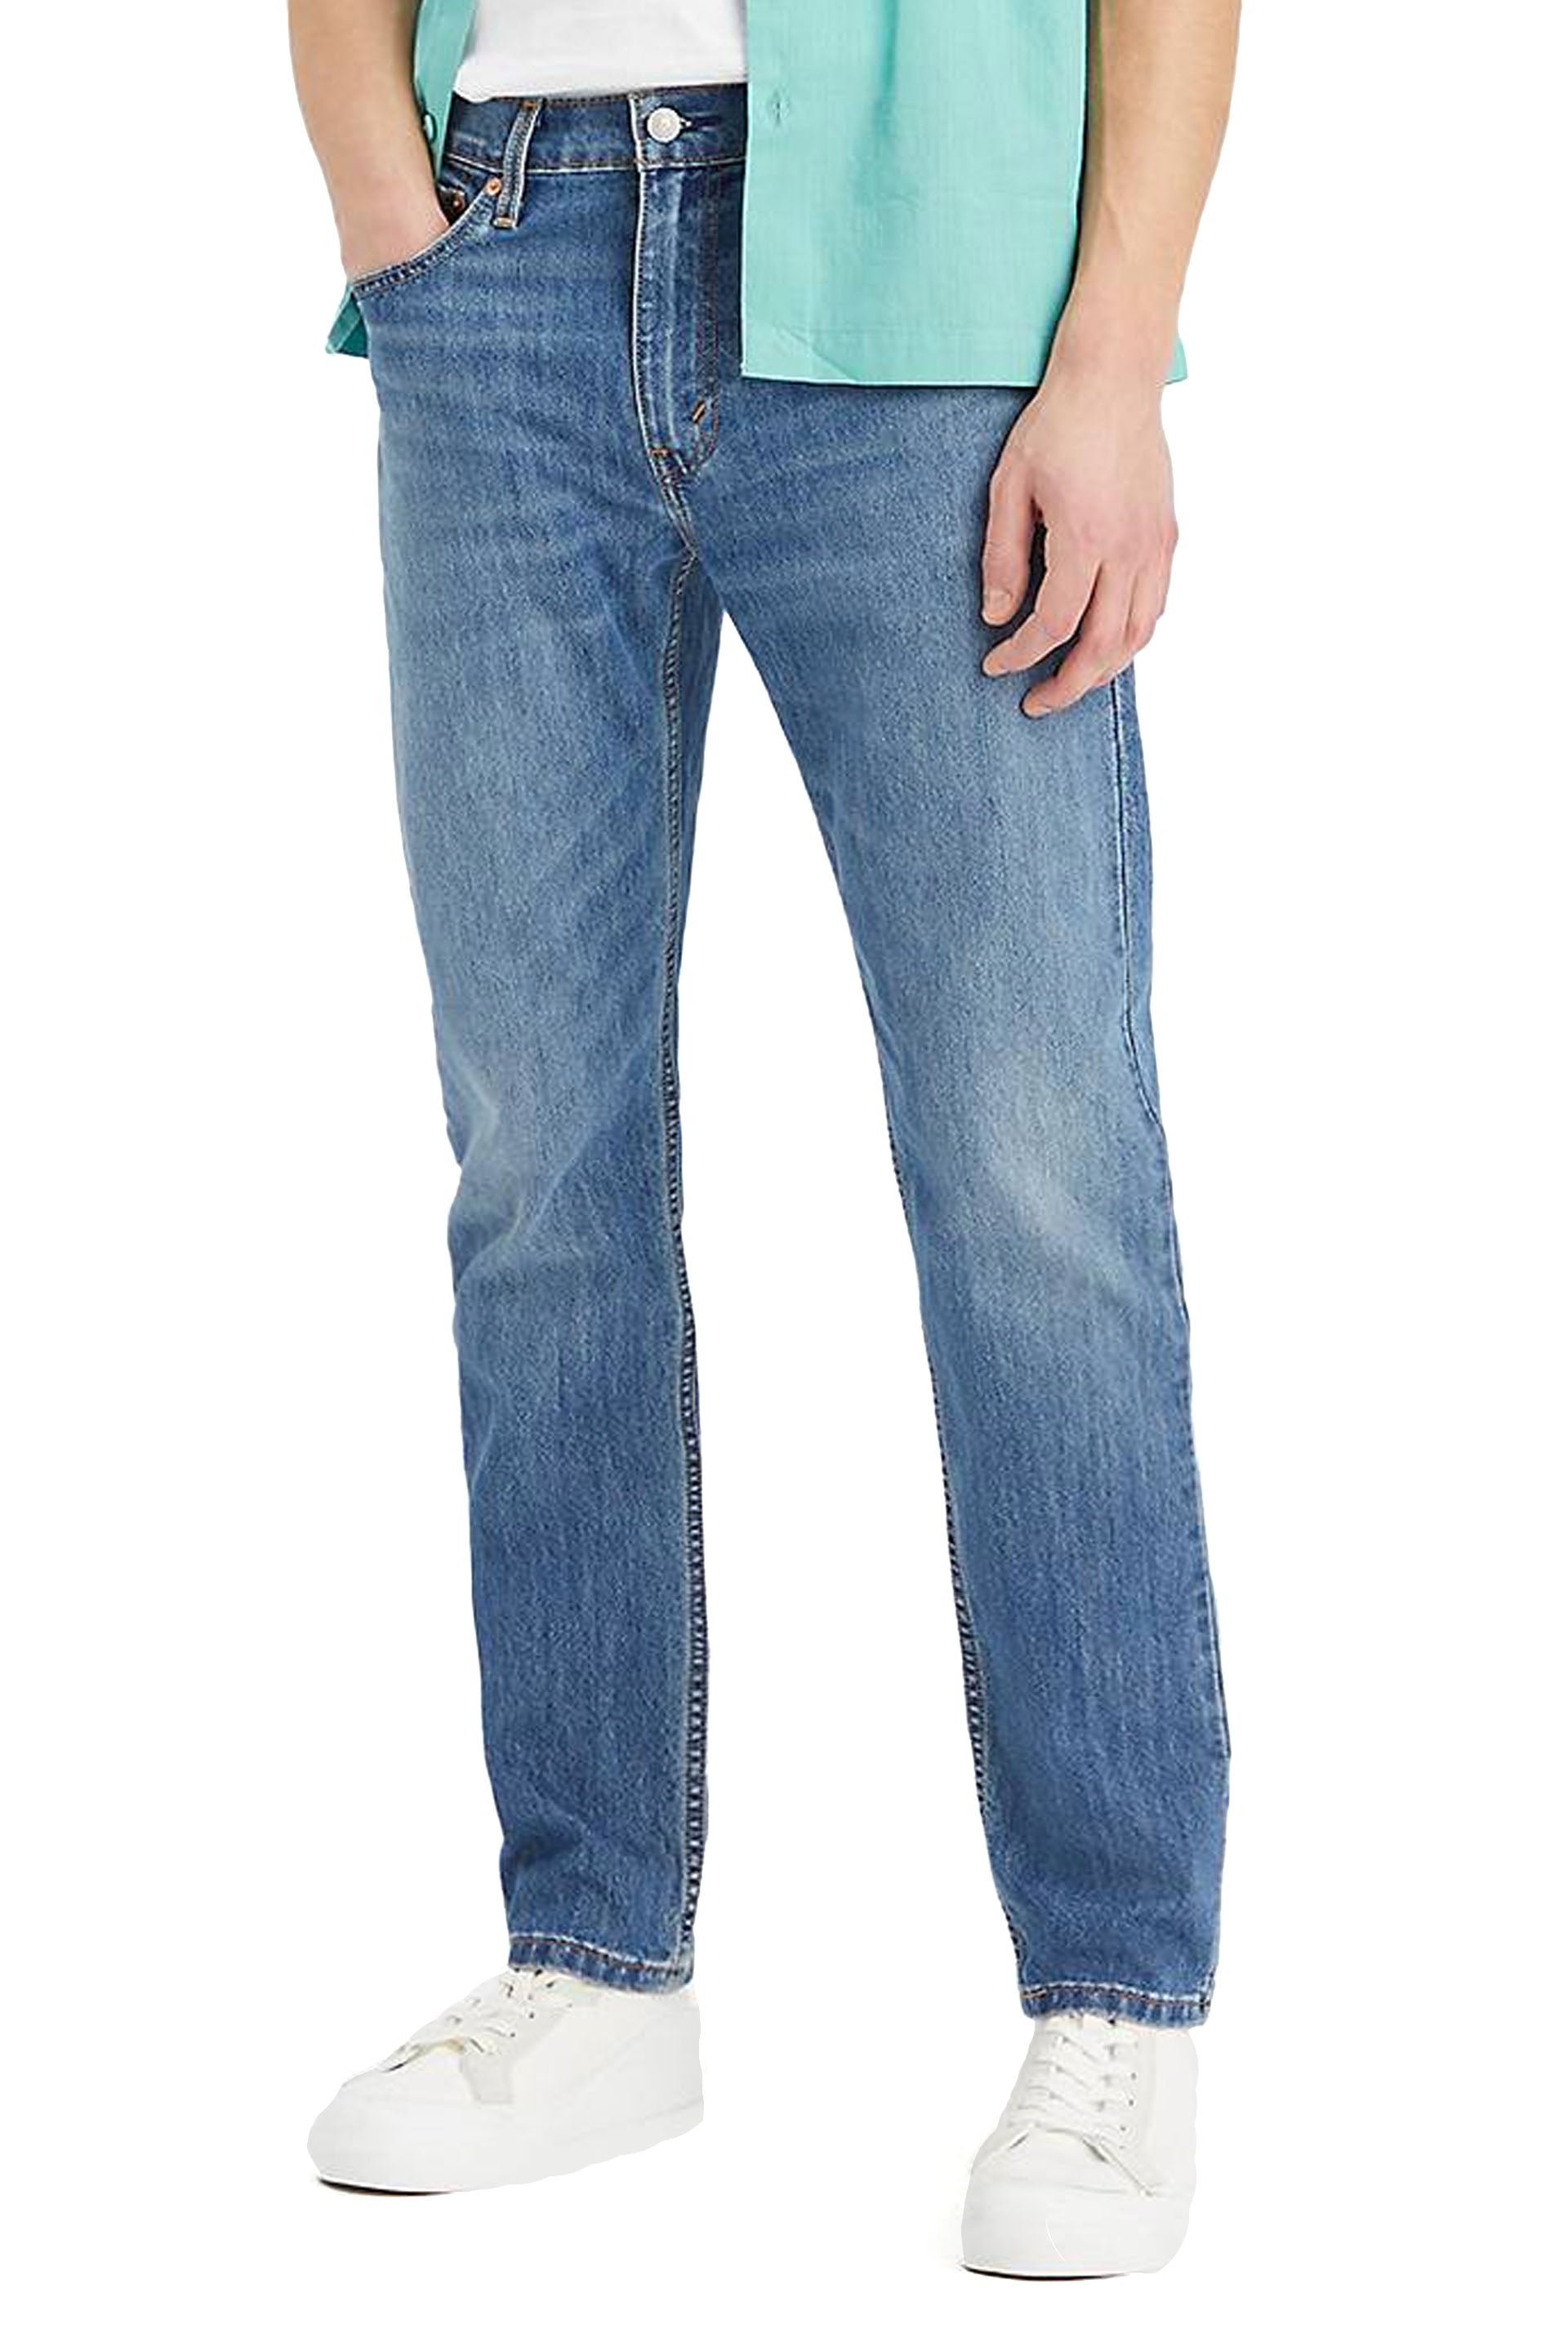 Tapered 502™ jeans